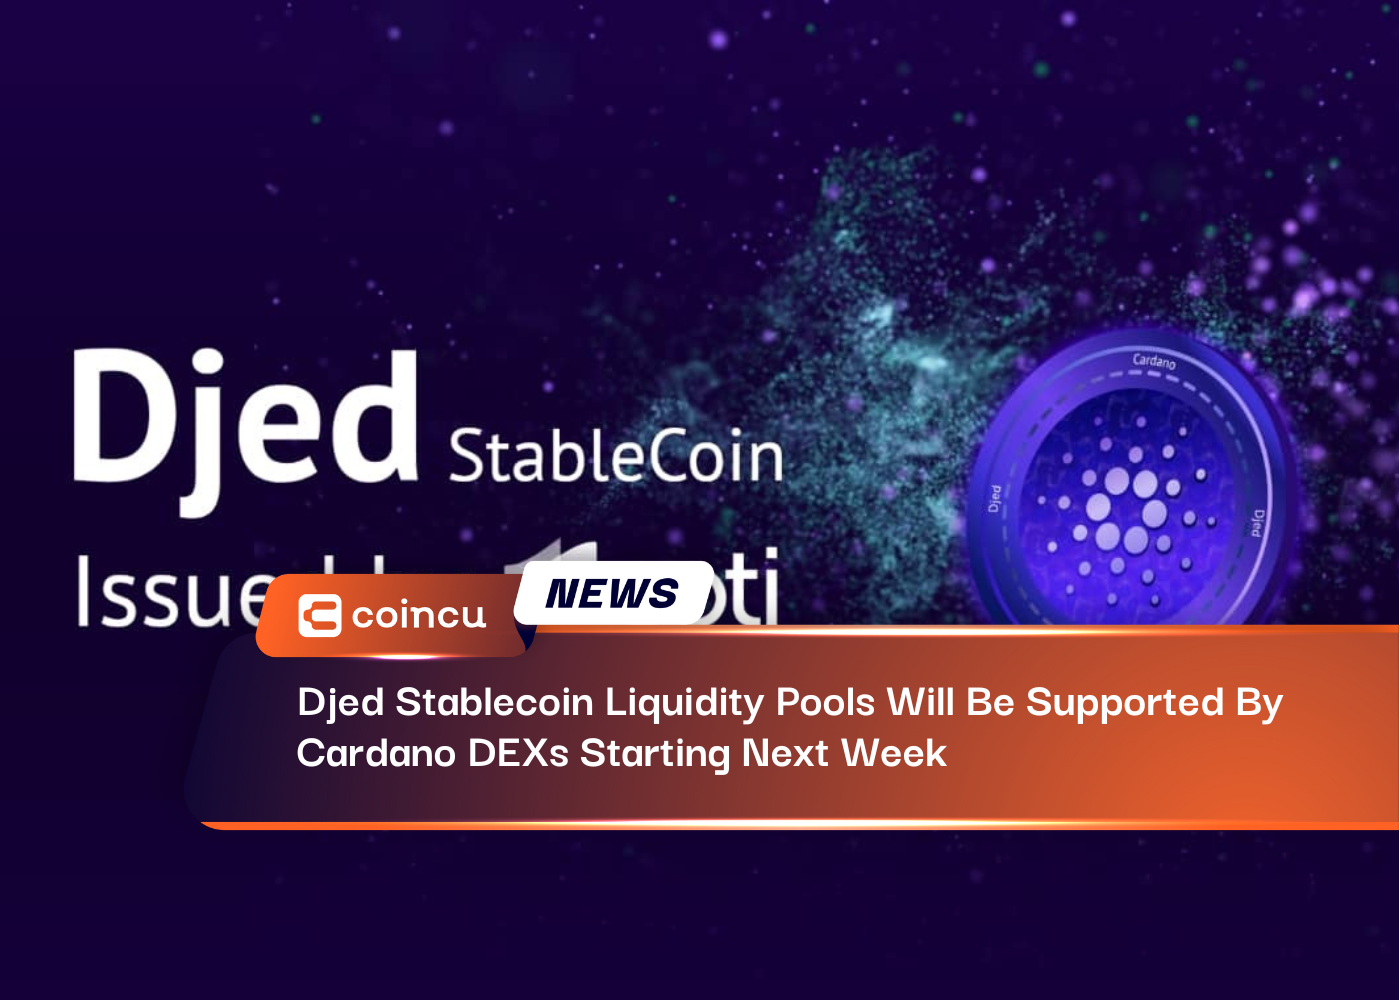 Djed Stablecoin Liquidity Pools Will Be Supported By Cardano DEXs Starting Next Week - CoinCu News